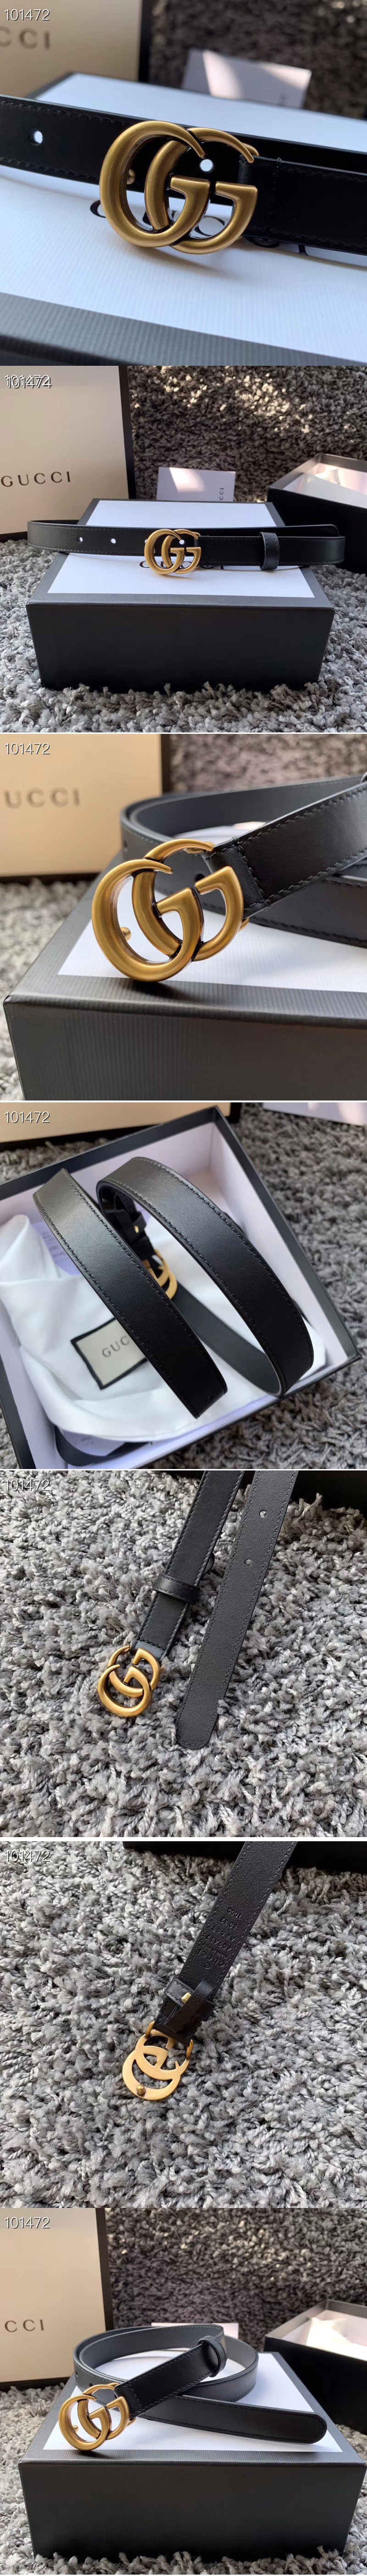 Replica Women's Gucci 409417 20mm Leather belt with Gold Double G buckle in Black Leather